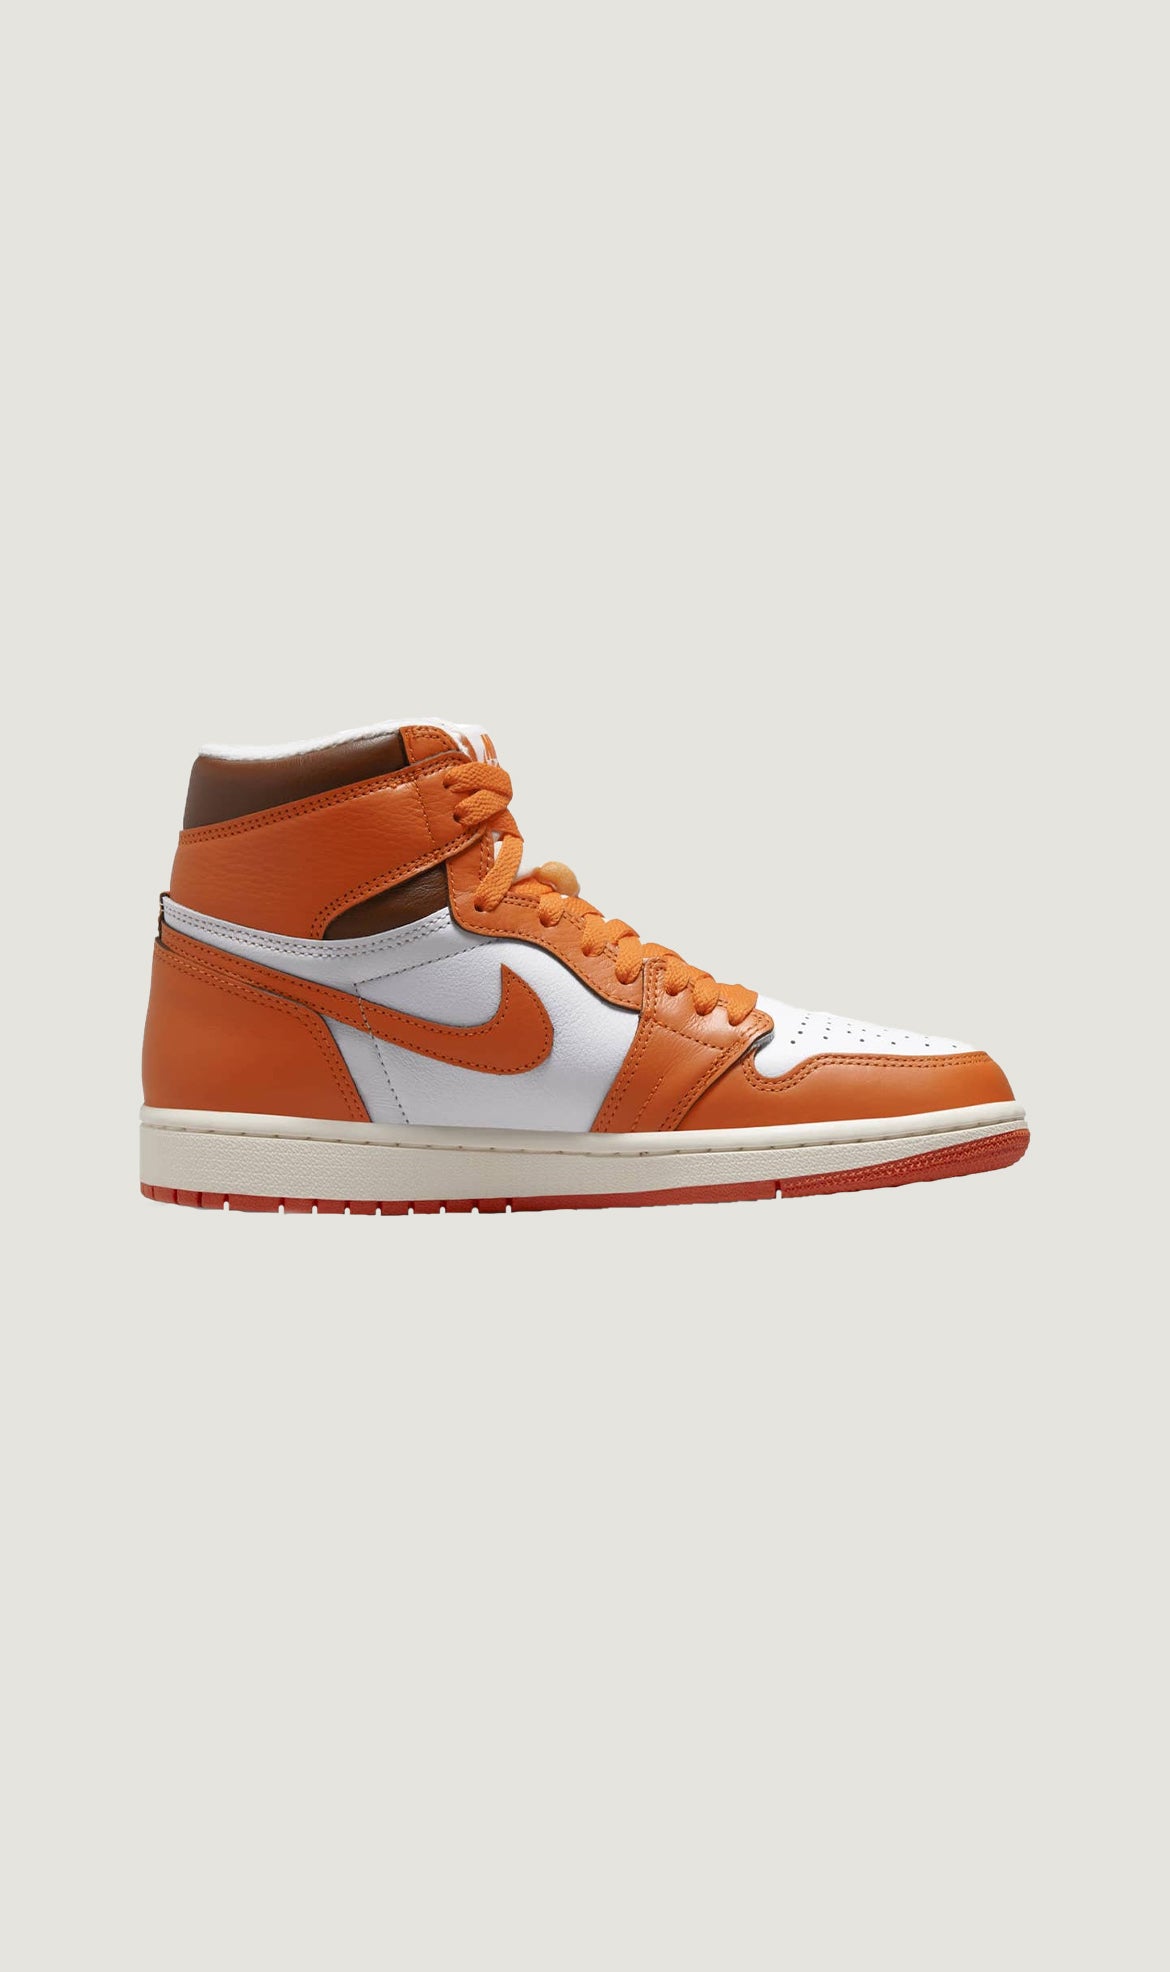 Load image into Gallery viewer, WMNS AIR JORDAN 1 HIGH OG - STARFISH
